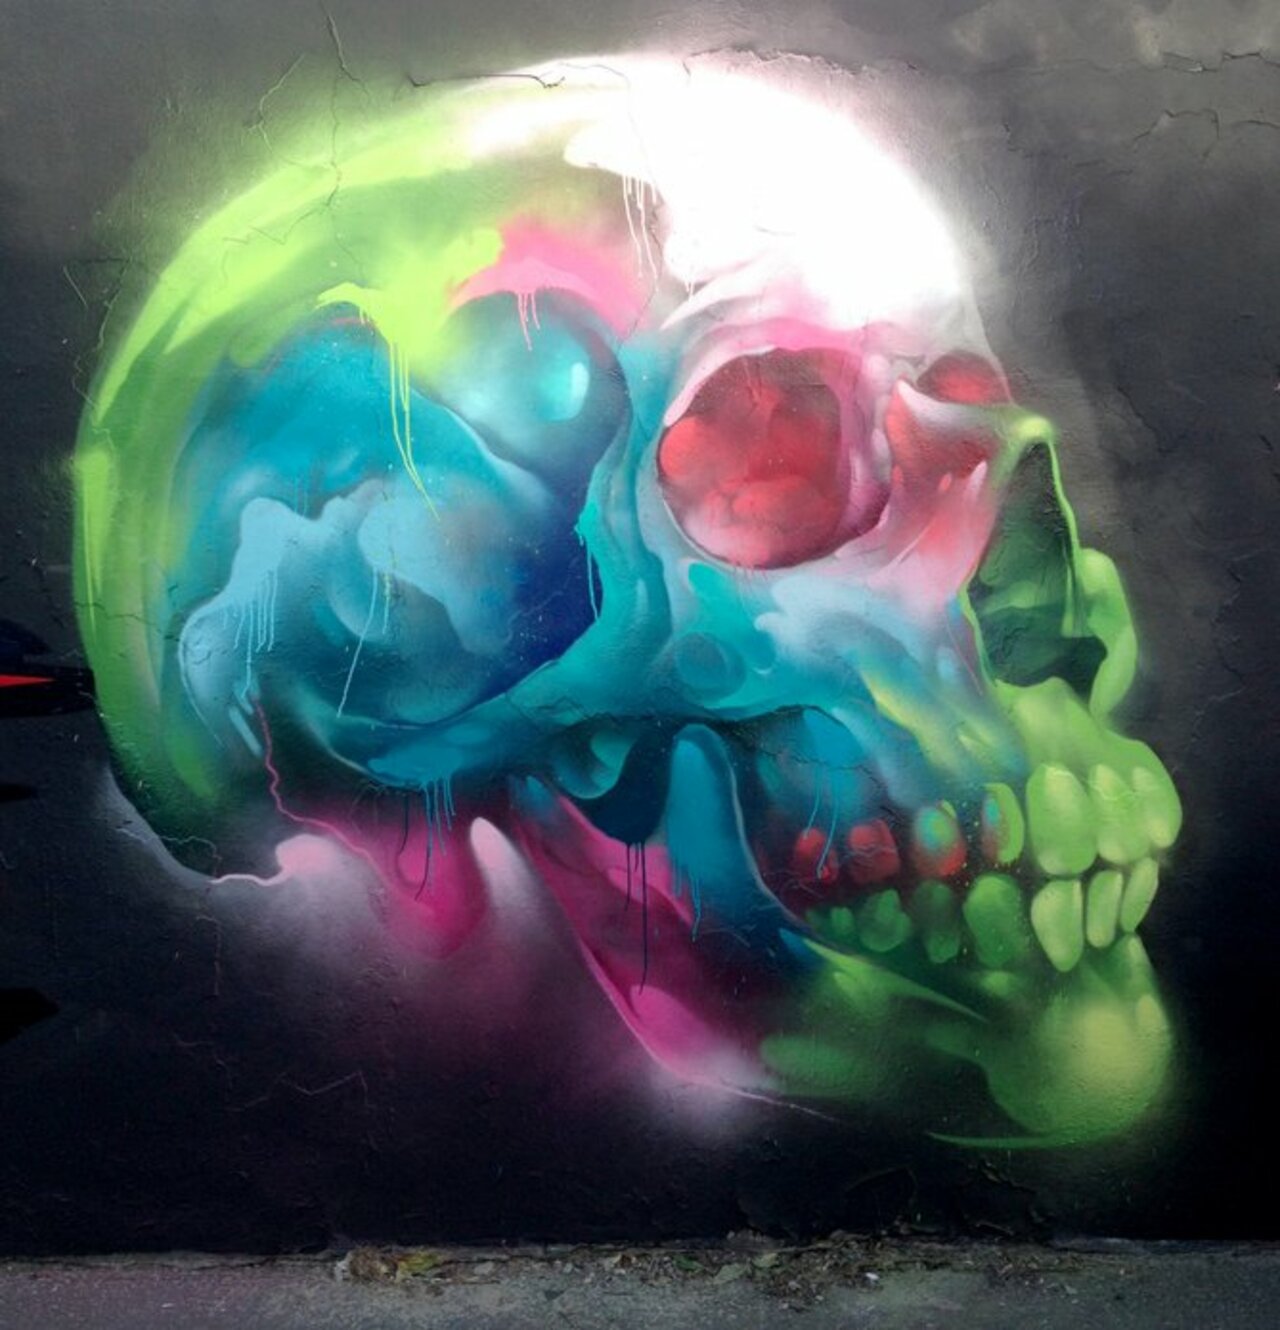 A Day-Glo skull by R.mer (http://globalstreetart.com/rmer) - just because, why not? -- Piece painted in the #UK. -- #globalstreetart #streetart #art #graffiti https://t.co/222f7vx43q